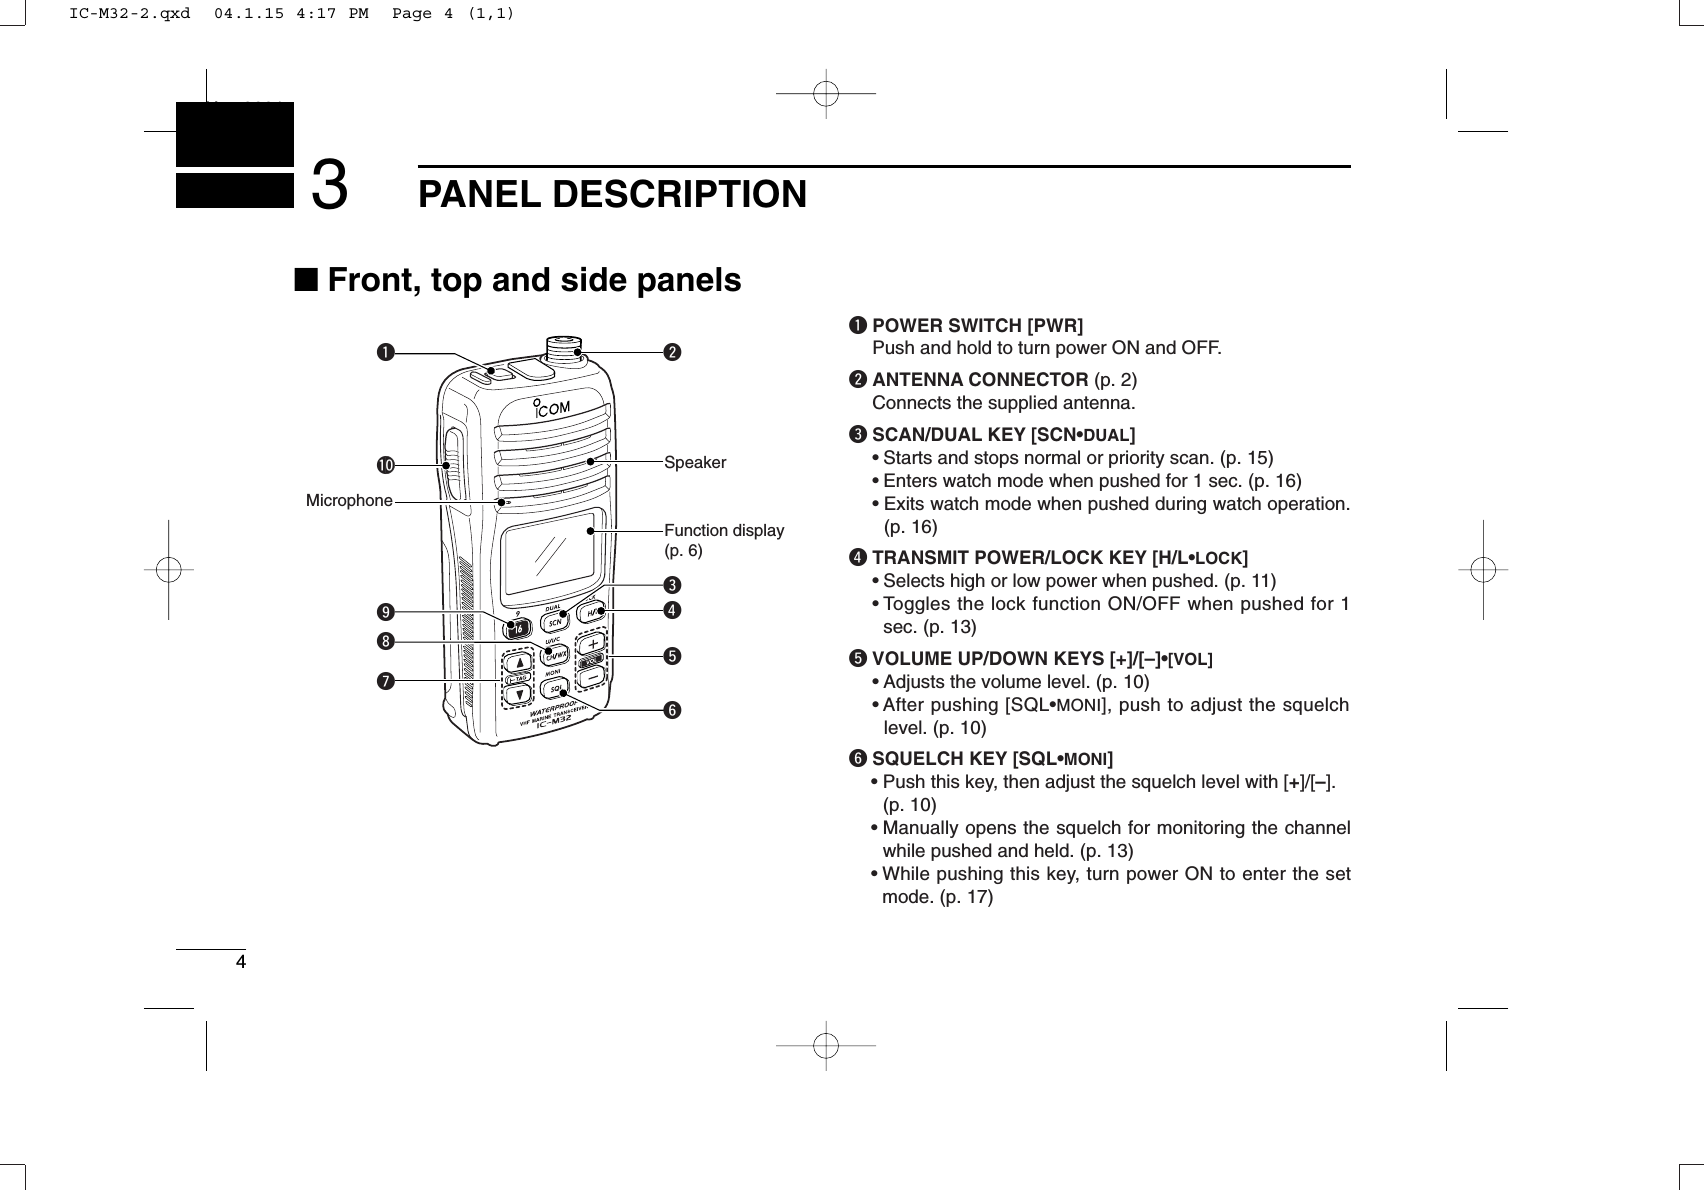 4PANEL DESCRIPTIONNew20013■Front, top and side panelsqPOWER SWITCH [PWR]Push and hold to turn power ON and OFF.wANTENNA CONNECTOR (p. 2)Connects the supplied antenna.eSCAN/DUAL KEY [SCN•DUAL]•Starts and stops normal or priority scan. (p. 15)•Enters watch mode when pushed for 1 sec. (p. 16)• Exits watch mode when pushed during watch operation.(p. 16)rTRANSMIT POWER/LOCK KEY [H/L•LOCK]•Selects high or low power when pushed. (p. 11)•Toggles the lock function ON/OFF when pushed for 1sec. (p. 13)tVOLUME UP/DOWN KEYS [+]/[–]•[VOL]•Adjusts the volume level. (p. 10)• After pushing [SQL•MONI], push to adjust the squelchlevel. (p. 10)ySQUELCH KEY [SQL•MONI]•Push this key, then adjust the squelch level with [+]/[–].(p. 10)• Manually opens the squelch for monitoring the channelwhile pushed and held. (p. 13)•While pushing this key, turn power ON to enter the setmode. (p. 17)rqoui!0wyteMicrophoneFunction display (p. 6)SpeakerIC-M32-2.qxd  04.1.15 4:17 PM  Page 4 (1,1)